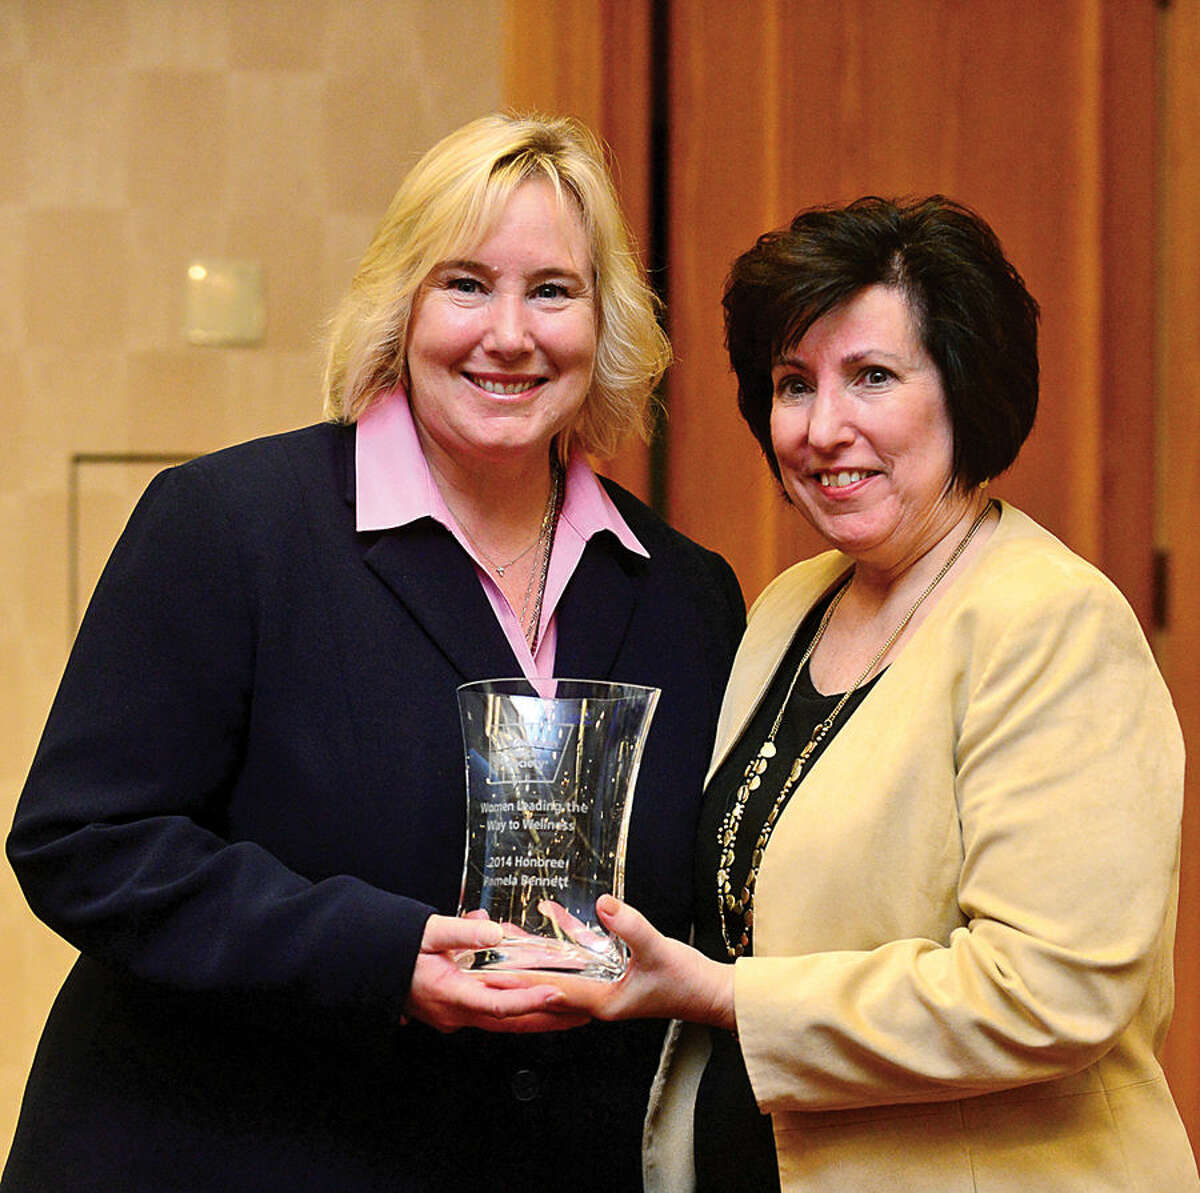 Hour photo / Erik Trautmann American Cancer Society Executive Vice President Peg Camp honors Executive Director of Patient and Professional Relations at Purdue Pharma L.P., Pamela Bennett, RN, BSN, CCE; as The American Cancer Society hosts the inaugural “Women Leading the Way to Wellness Breakfast” Wednesday morning at Dolce Norwalk. Fairfield county residents, local business and community leaders, and health professionals gathered to learn more about cancer prevention and early detection.